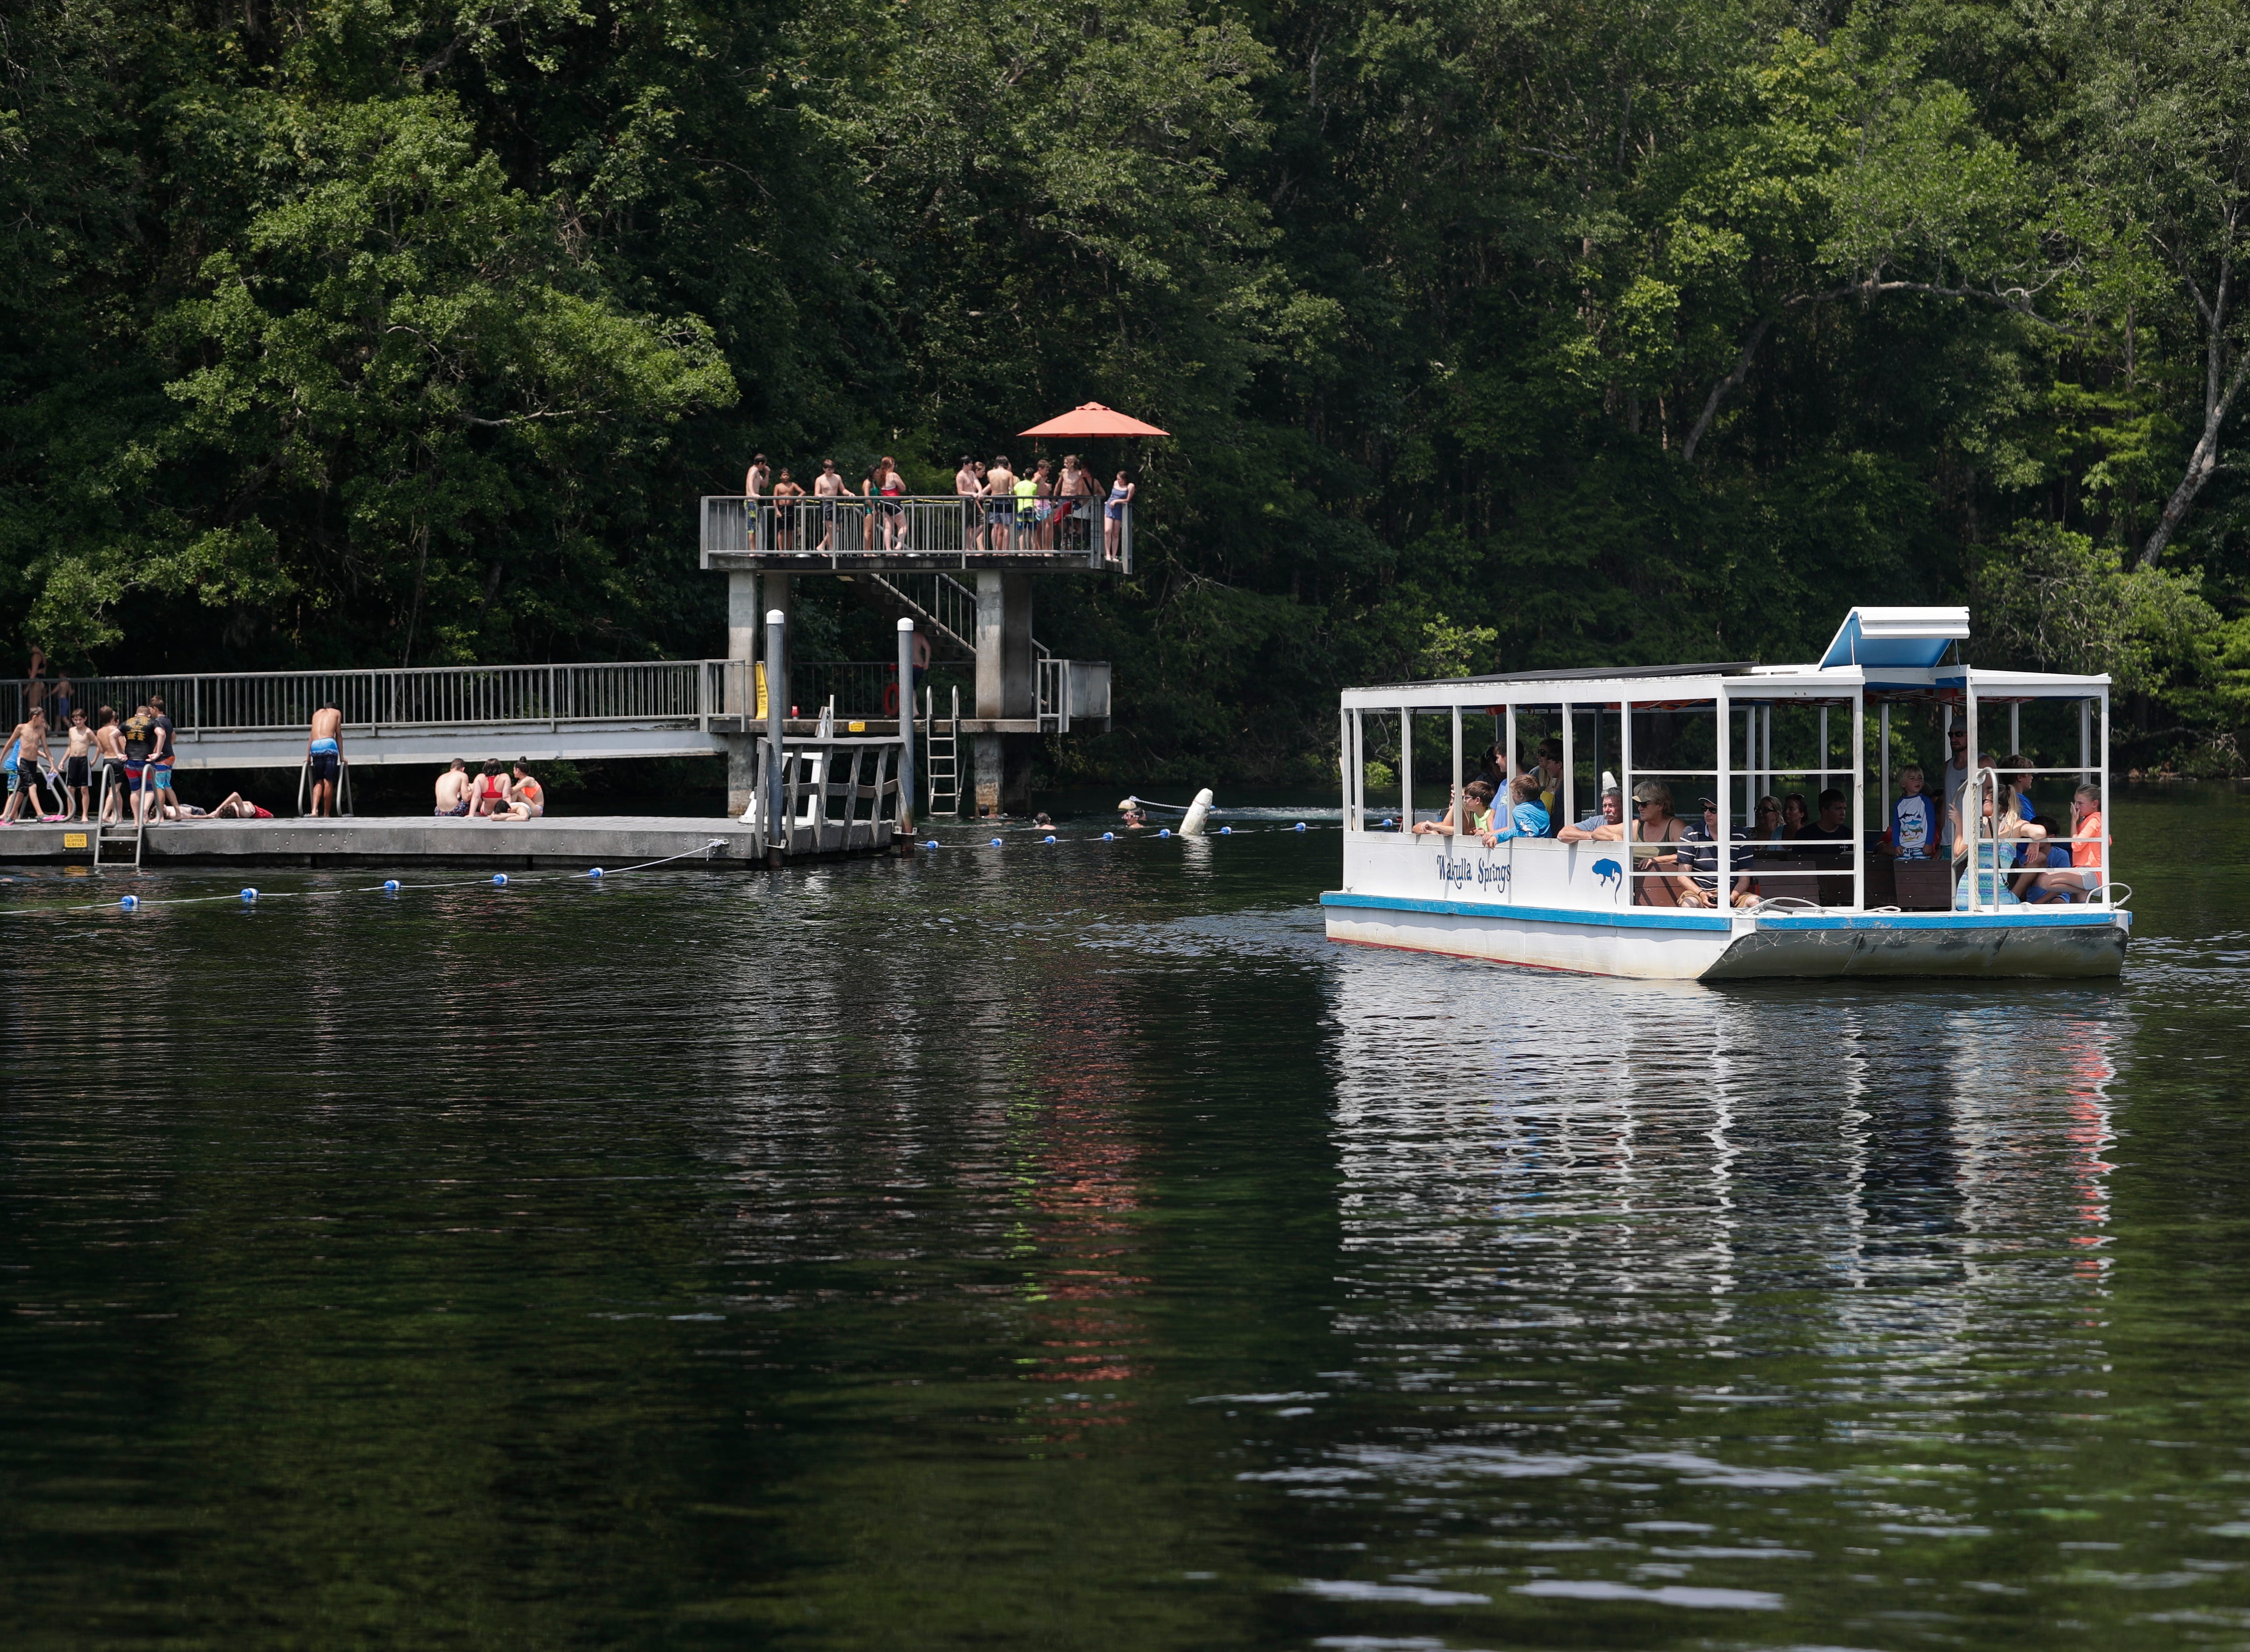 When school lets out for the summer, Wakulla Springs fills up with children and families looking to cool off. Swimming, diving and historic boat tours are popular activities at the state park. 